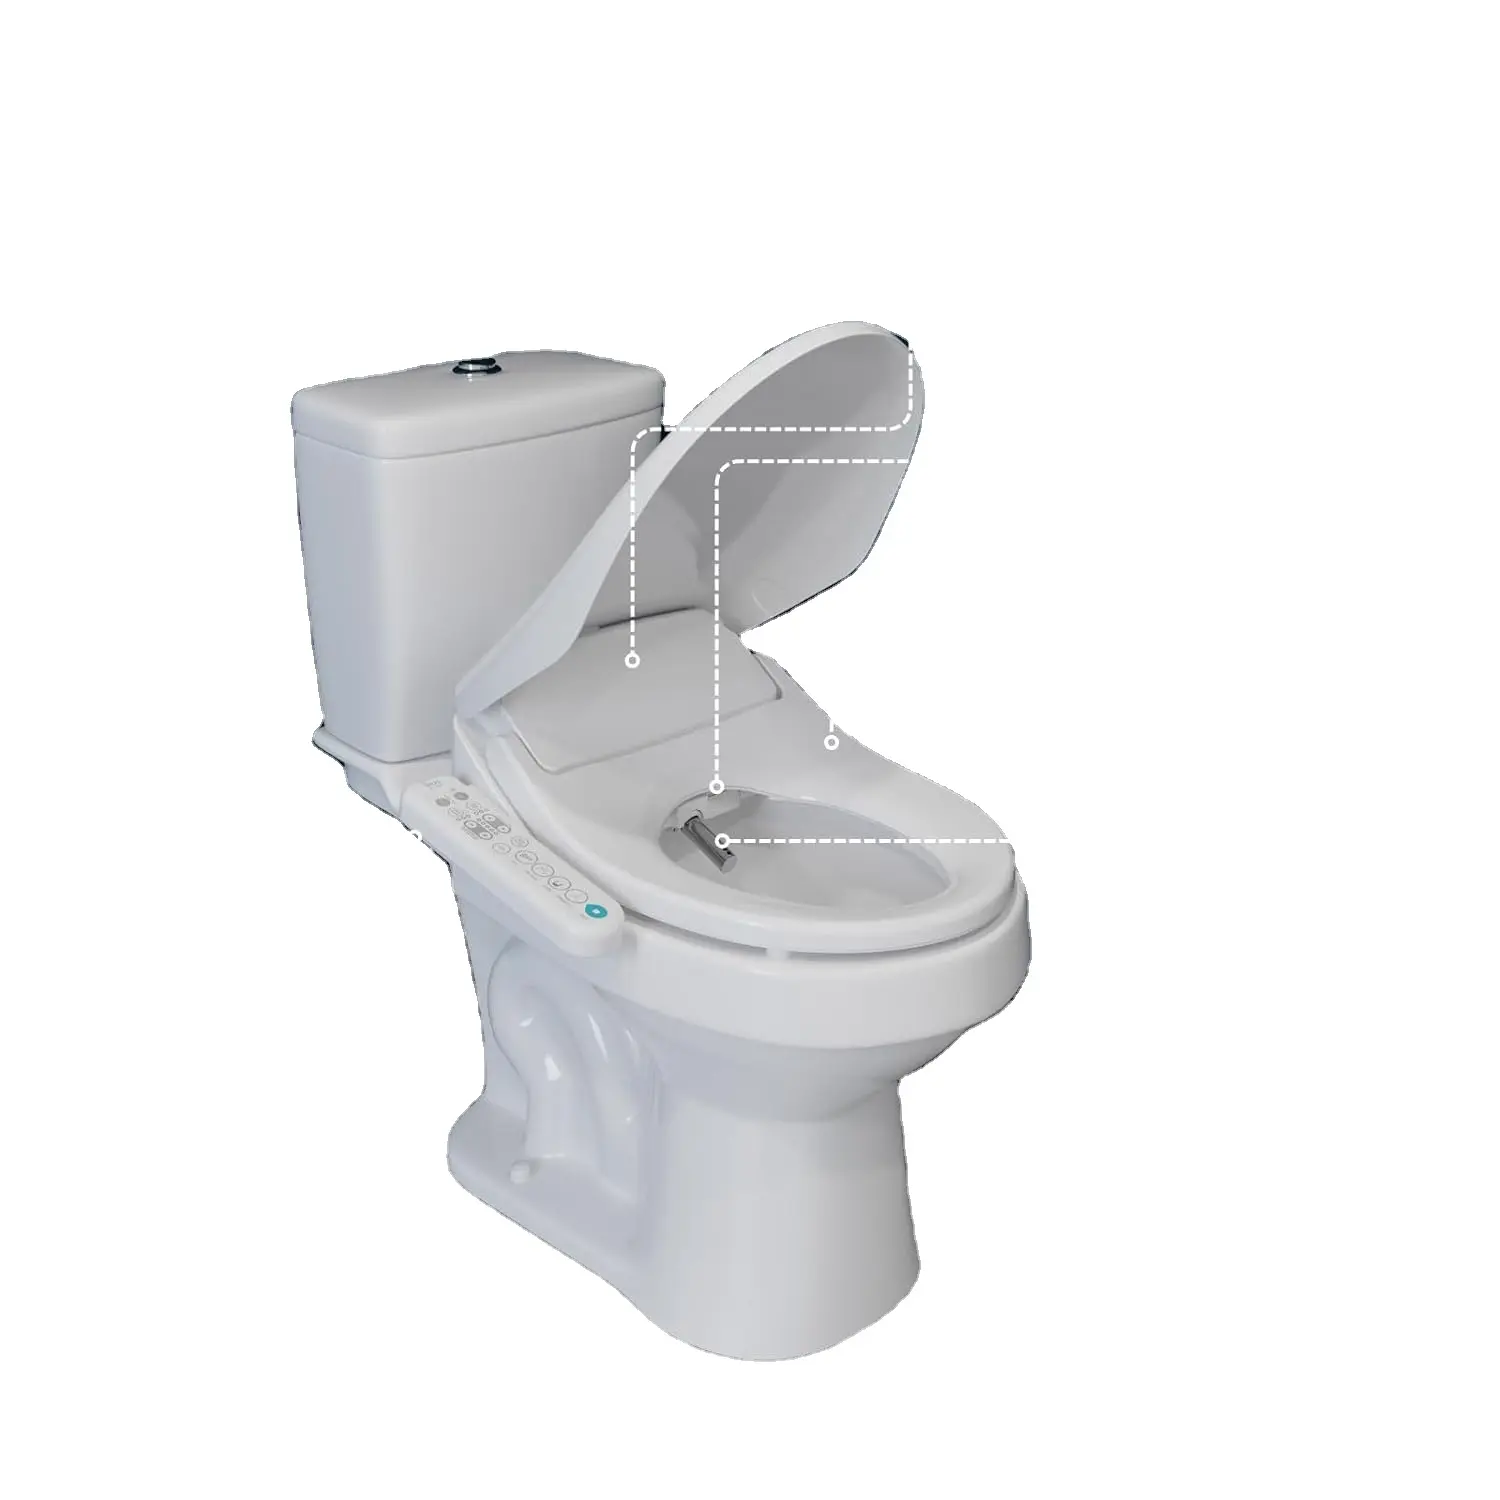 Electric Heated Bidet Toilet Seat Elongated Warm Water Smart Heated Water Luxury Bidet Toilet Seat with Kids Mode